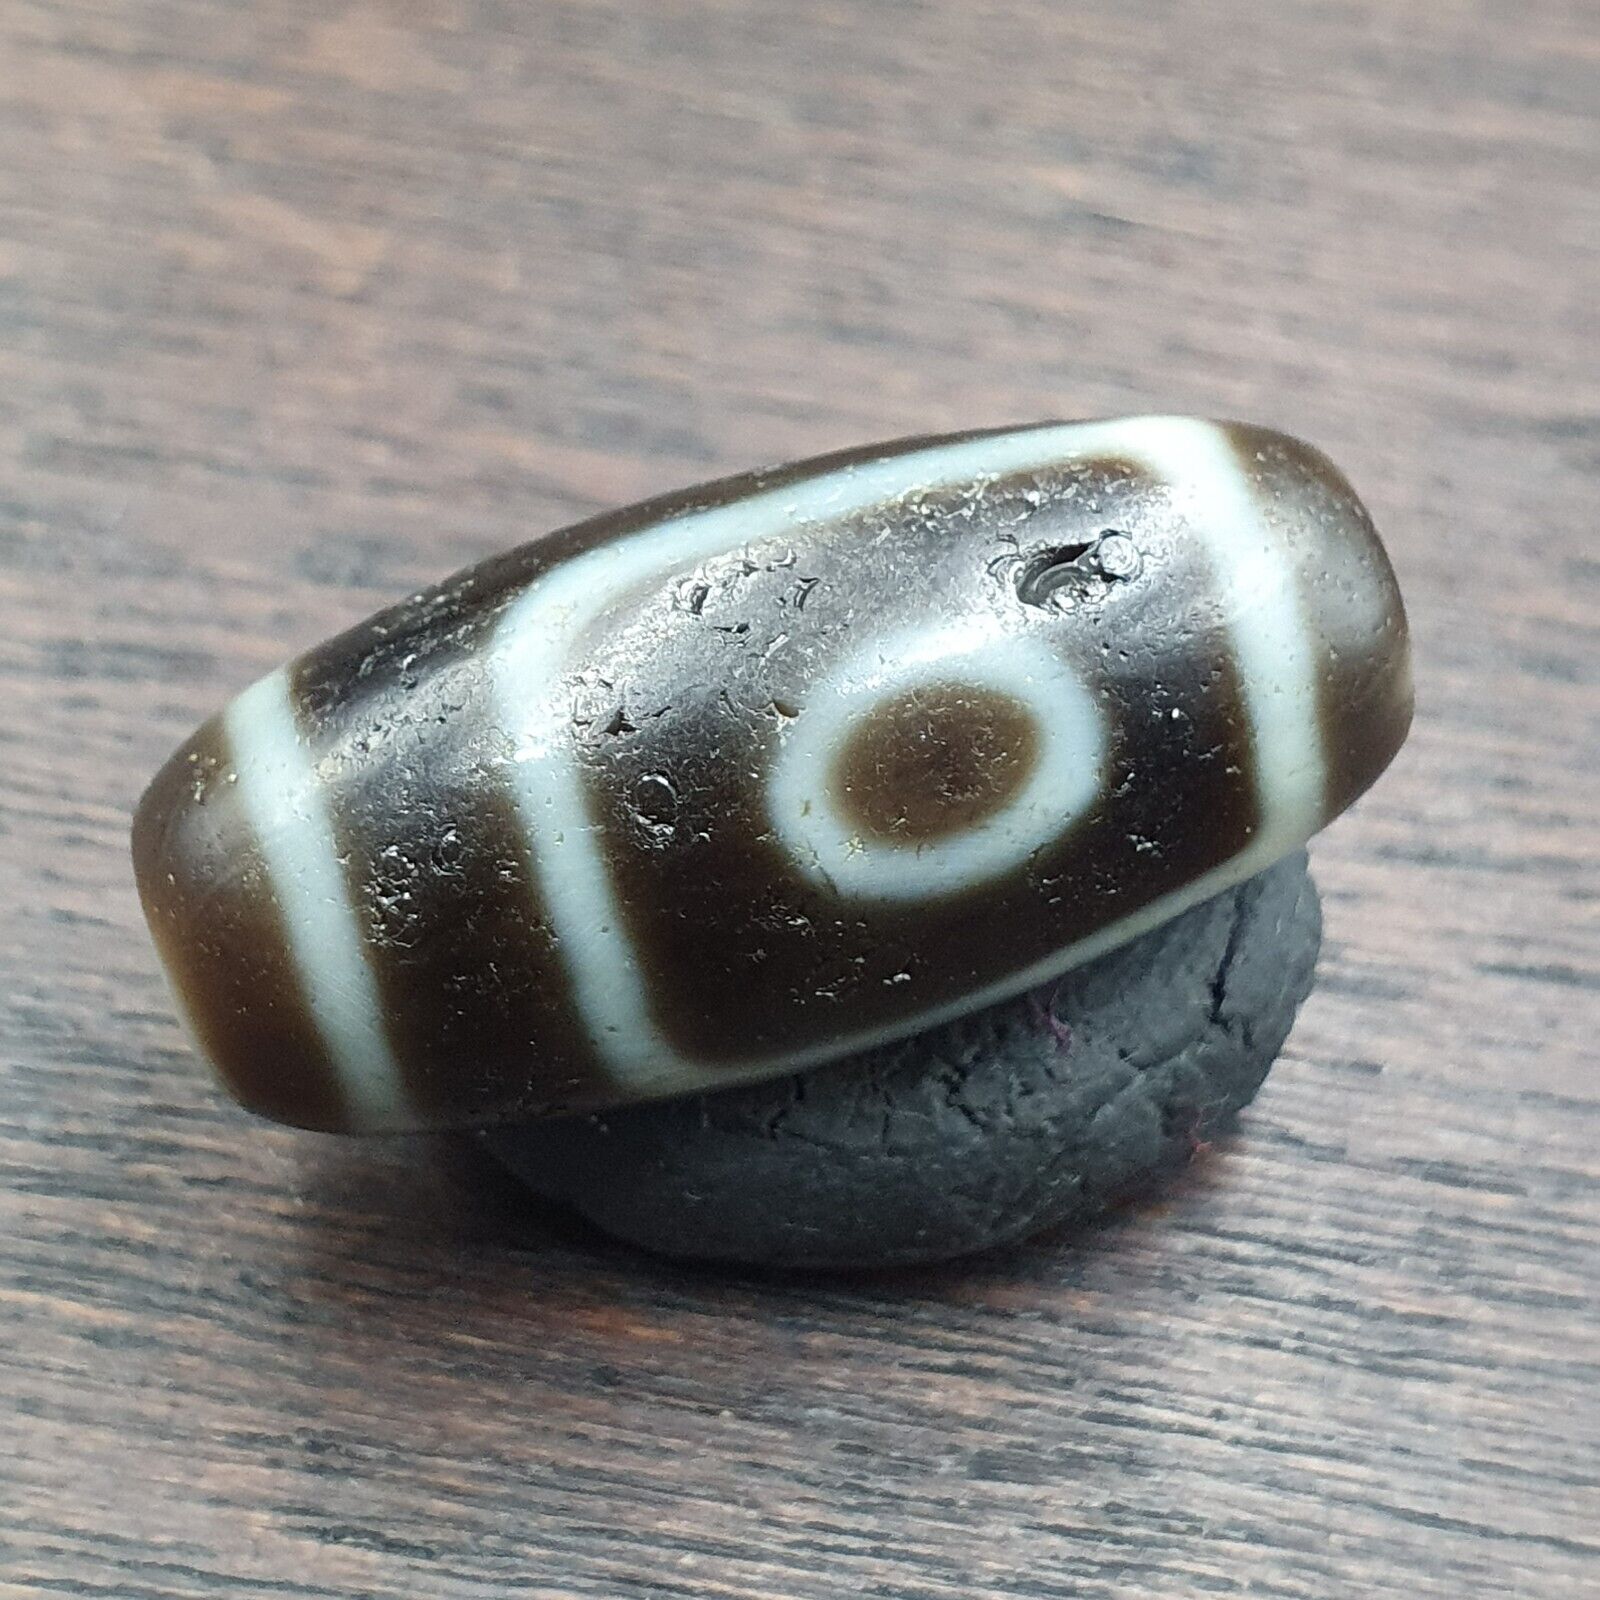 "Two antique Tibetan Agate Dzi beads, featuring a rare 'slide eyes' design, highly prized as an amulet (OTB8-2). These high-quality beads are believed to bring good fortune, protection, and spiritual growth to the wearer. Originating from Tibet, they showcase exceptional craftsmanship and cultural heritage, making them a valuable addition to any collection."